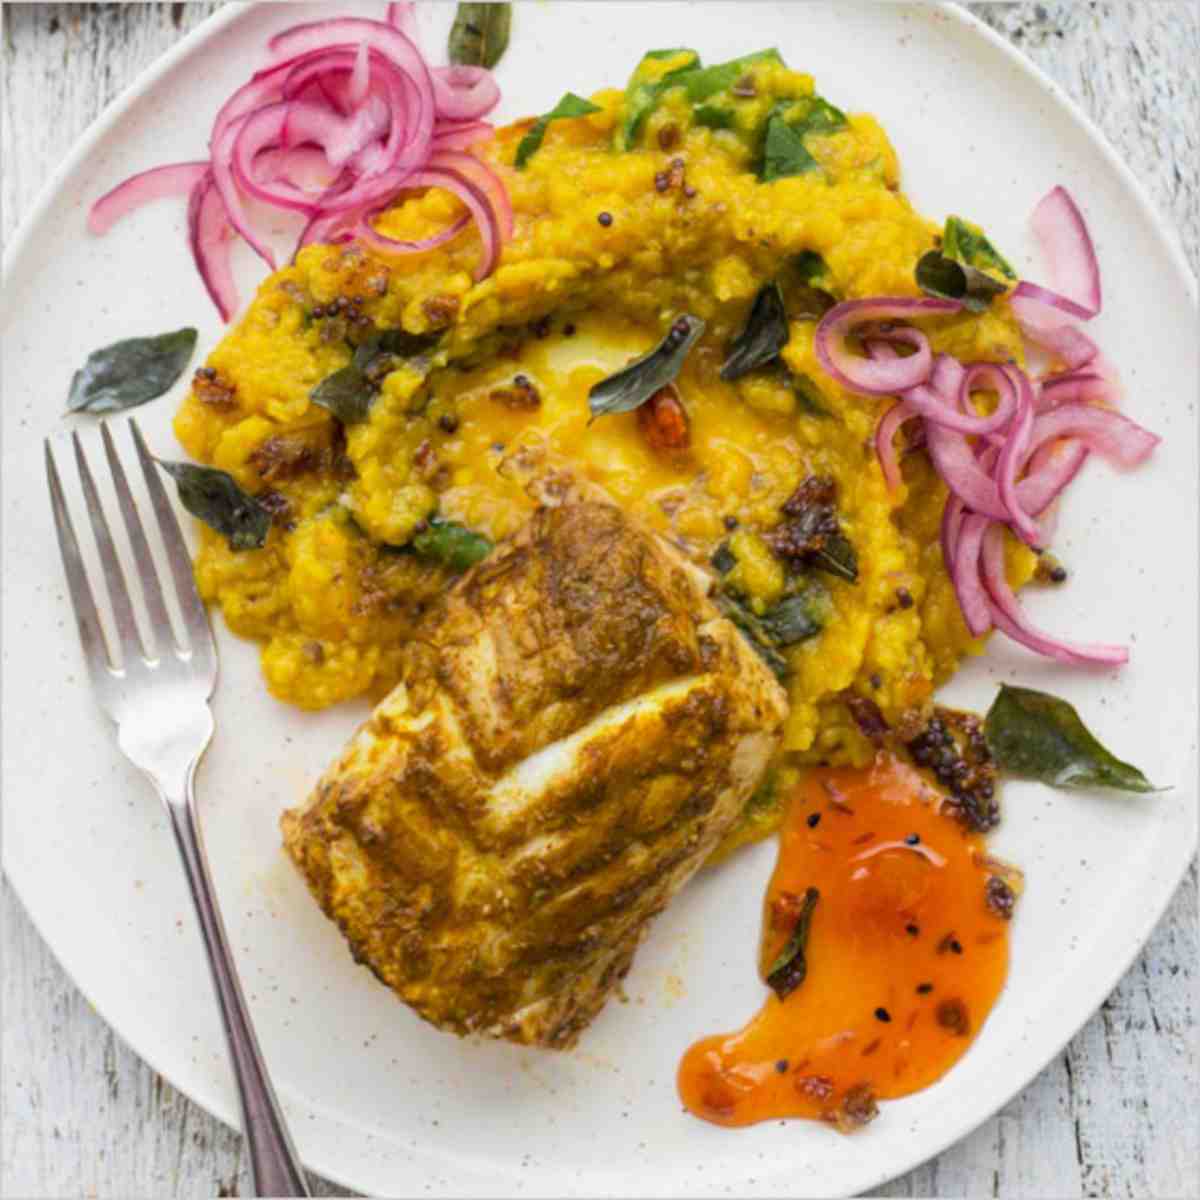 Baked cod with red lentils